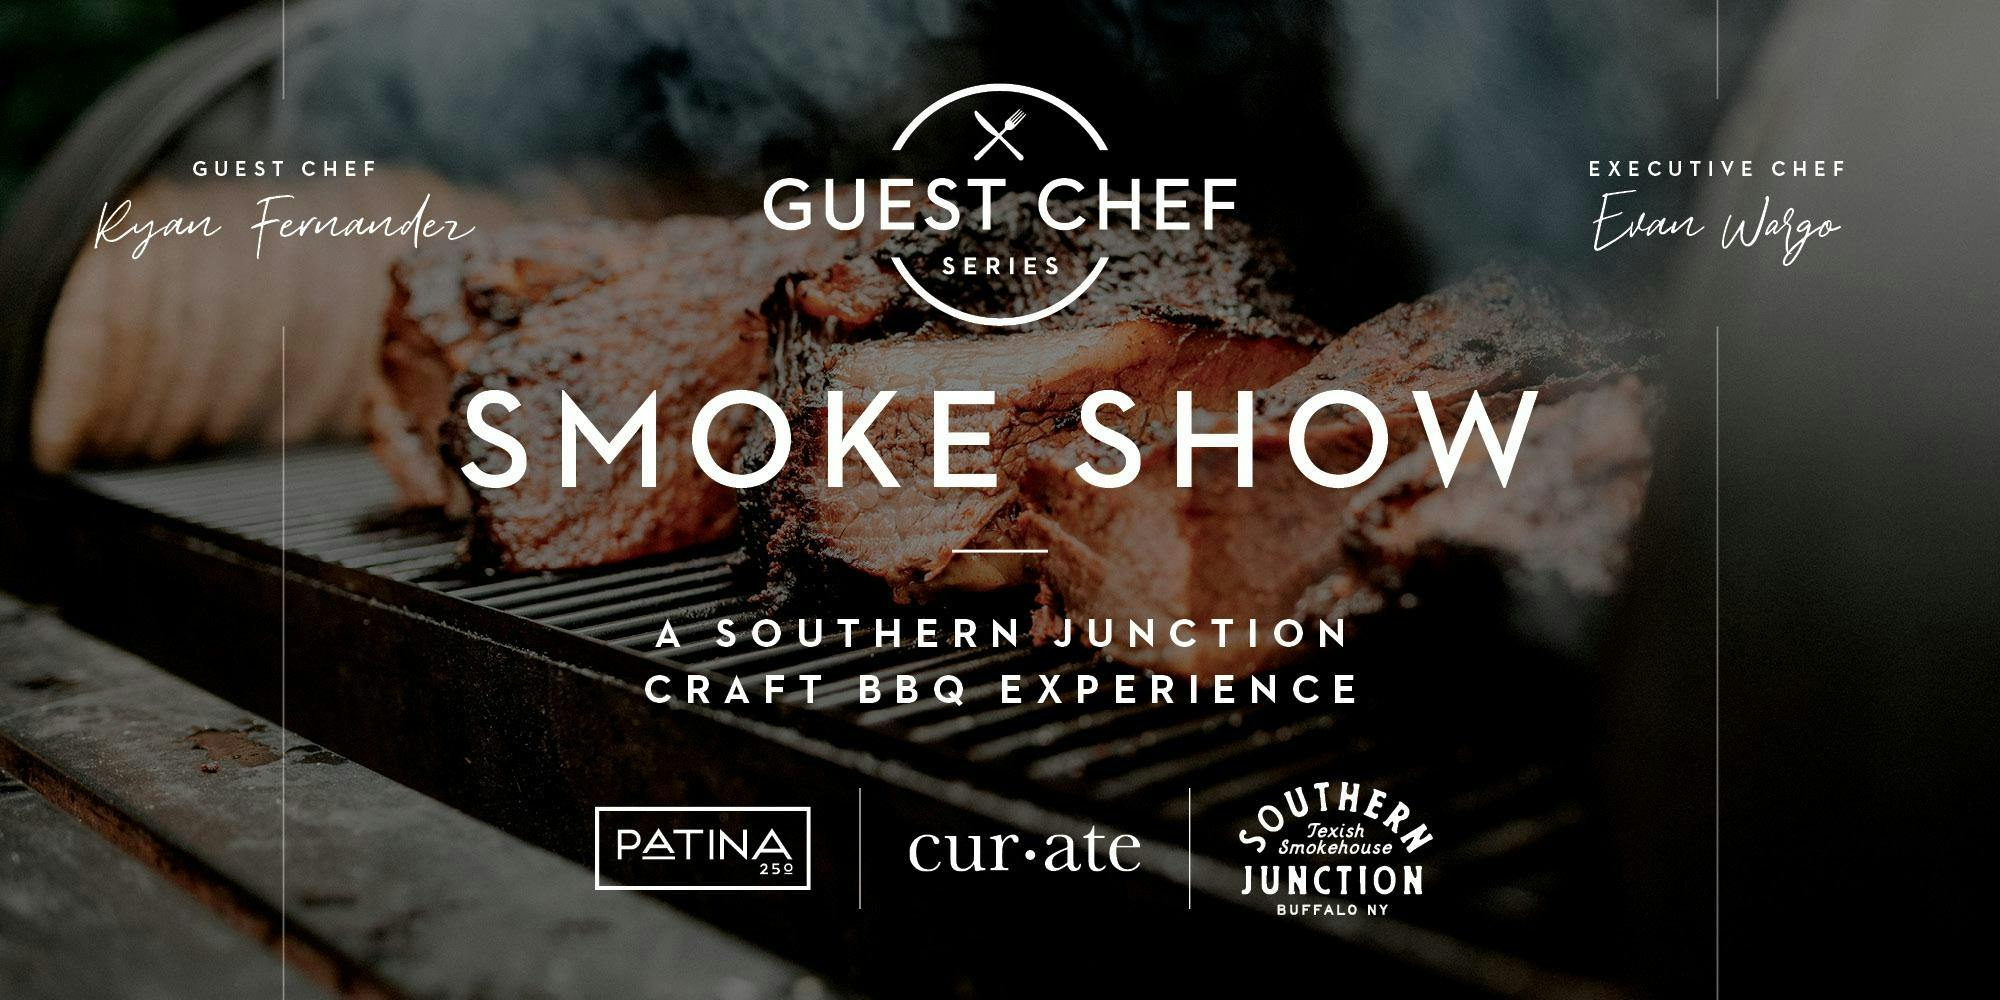 Patina 250 Guest Chef Series - Smoke Show: A Southern Junction Craft BBQ Experience